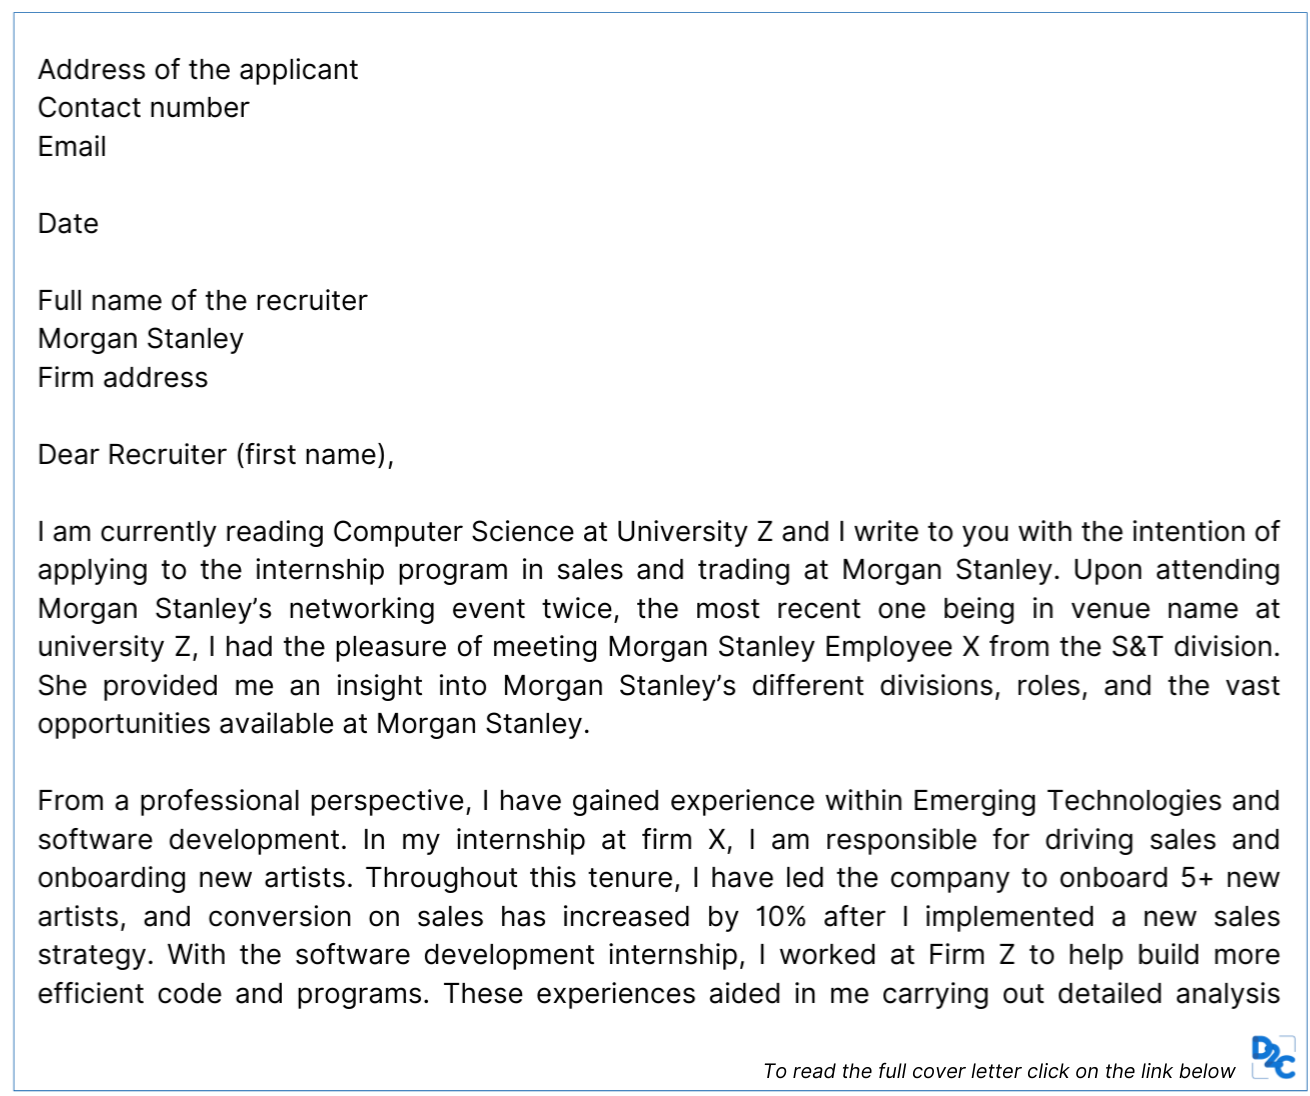 morgan stanley cover letter example